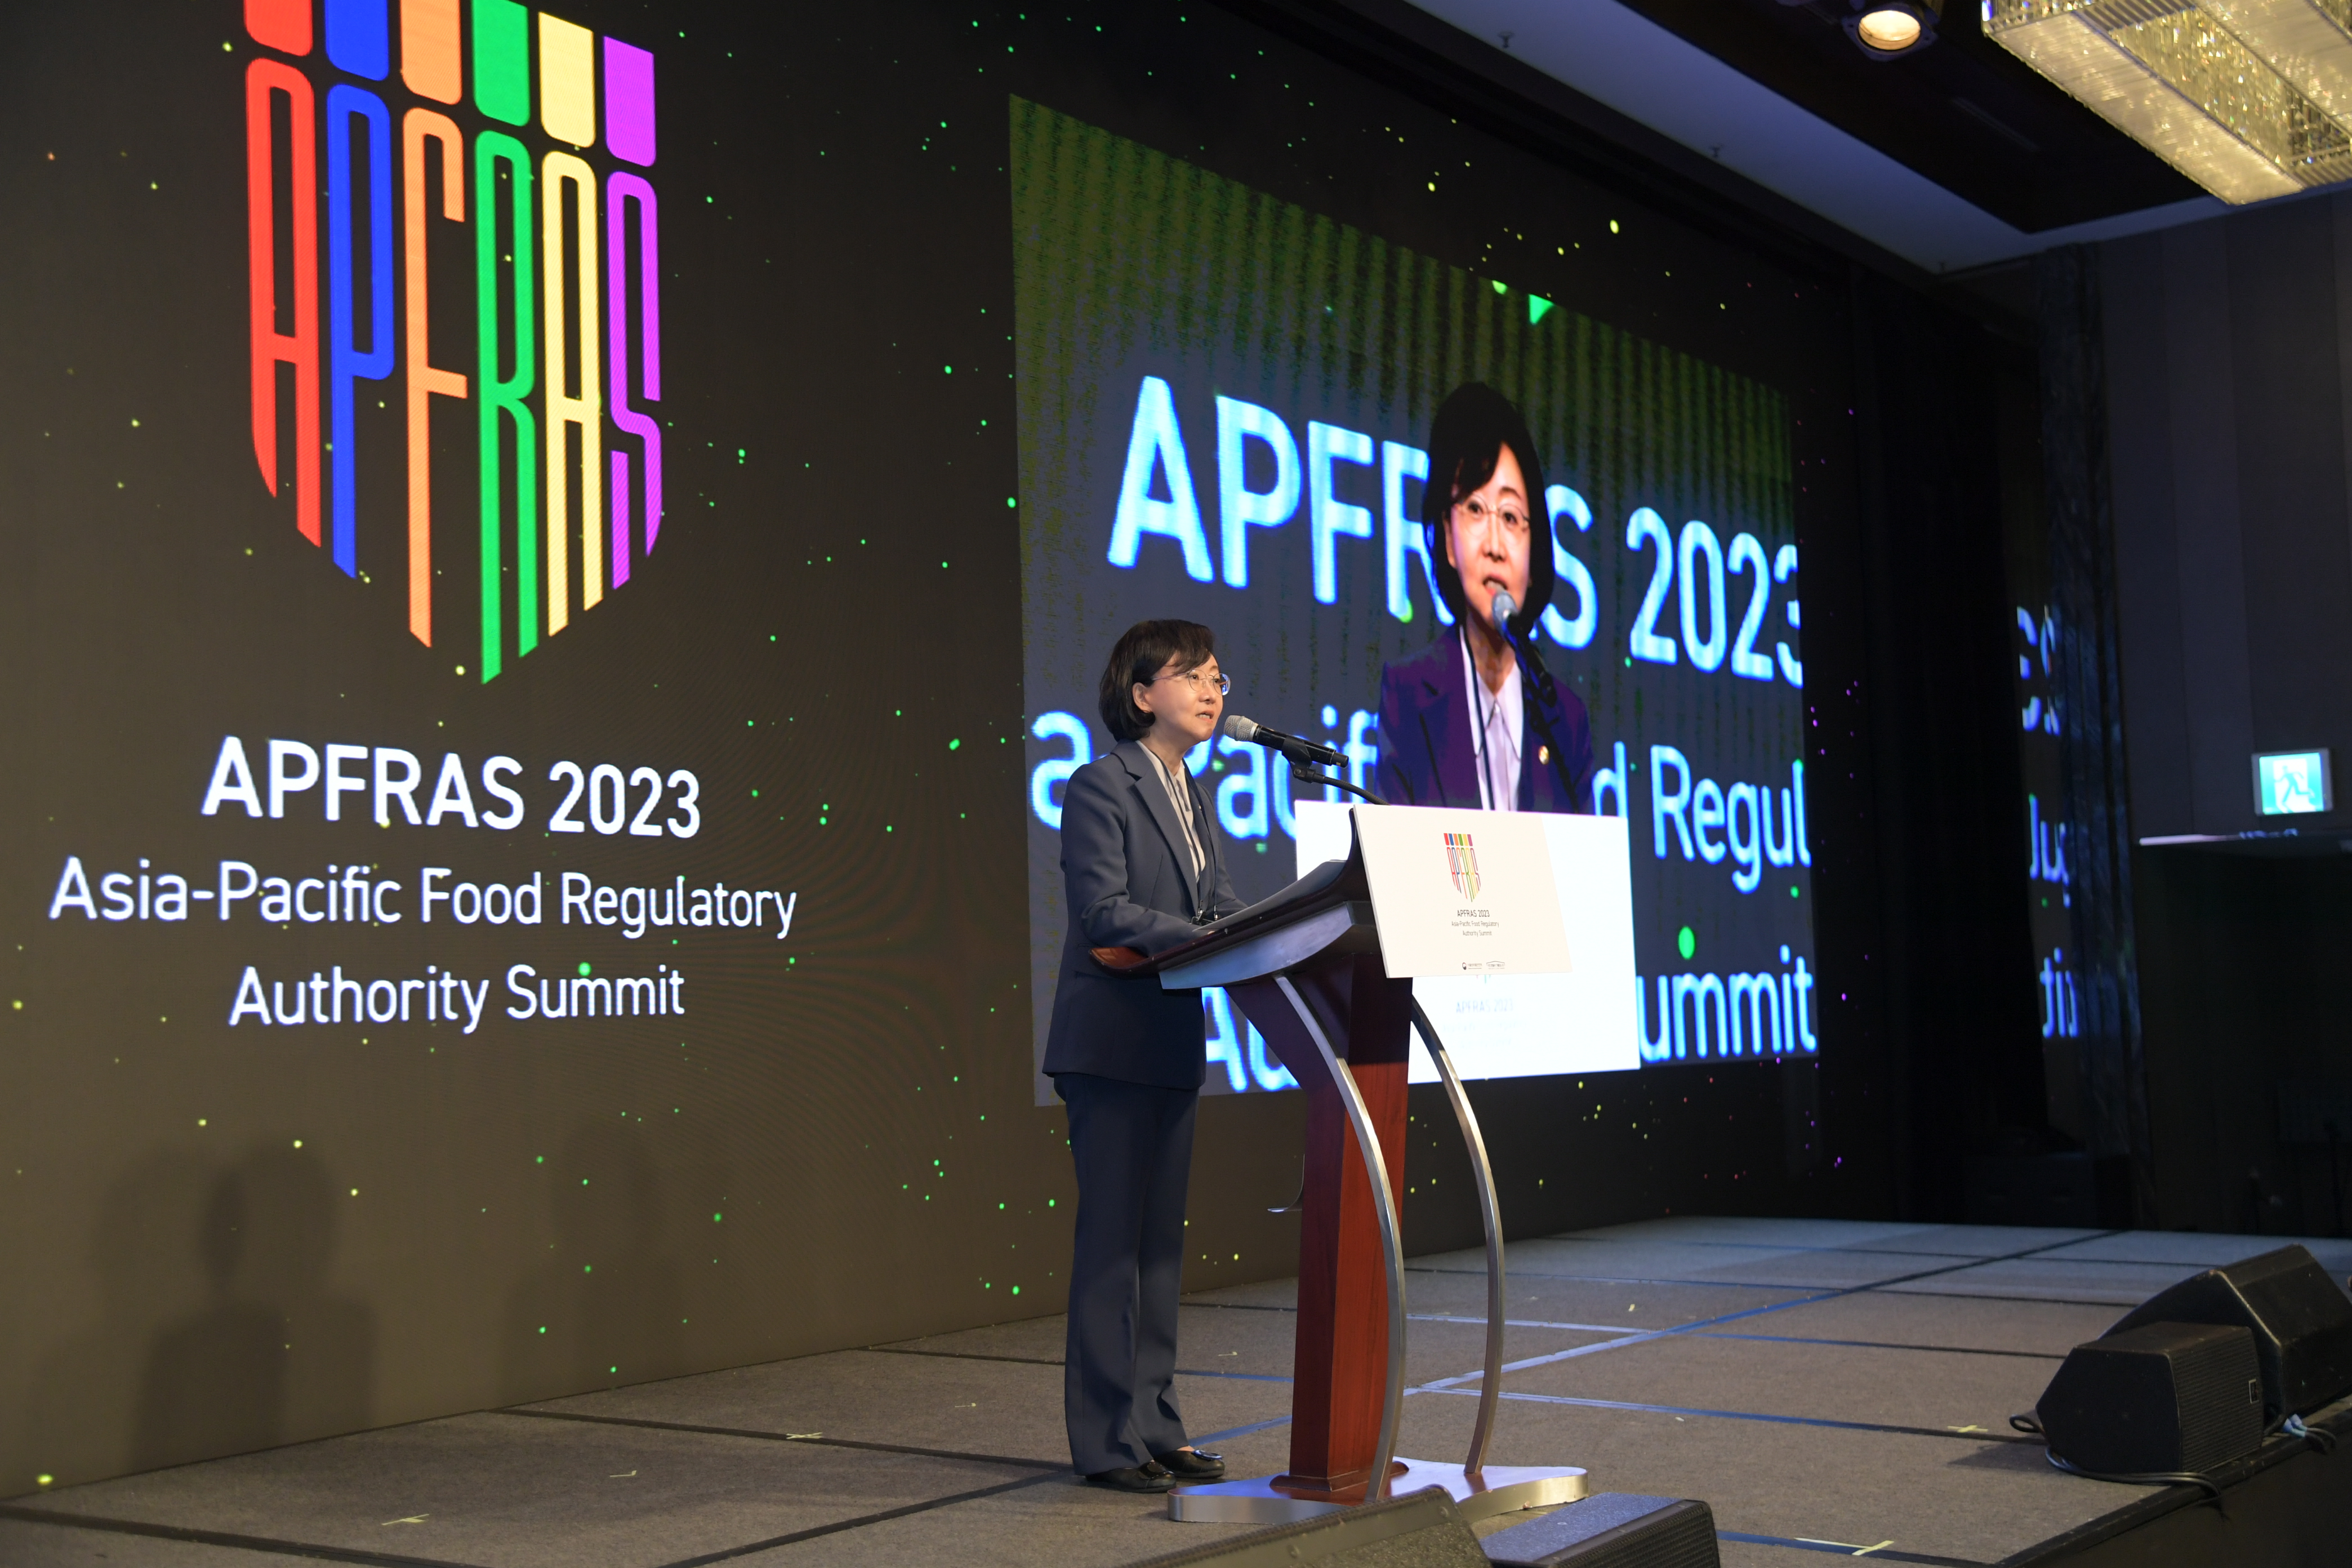 Photo News2 - [May 10, 2023] Minister Delivers Opening Speech at APFRAS 2023